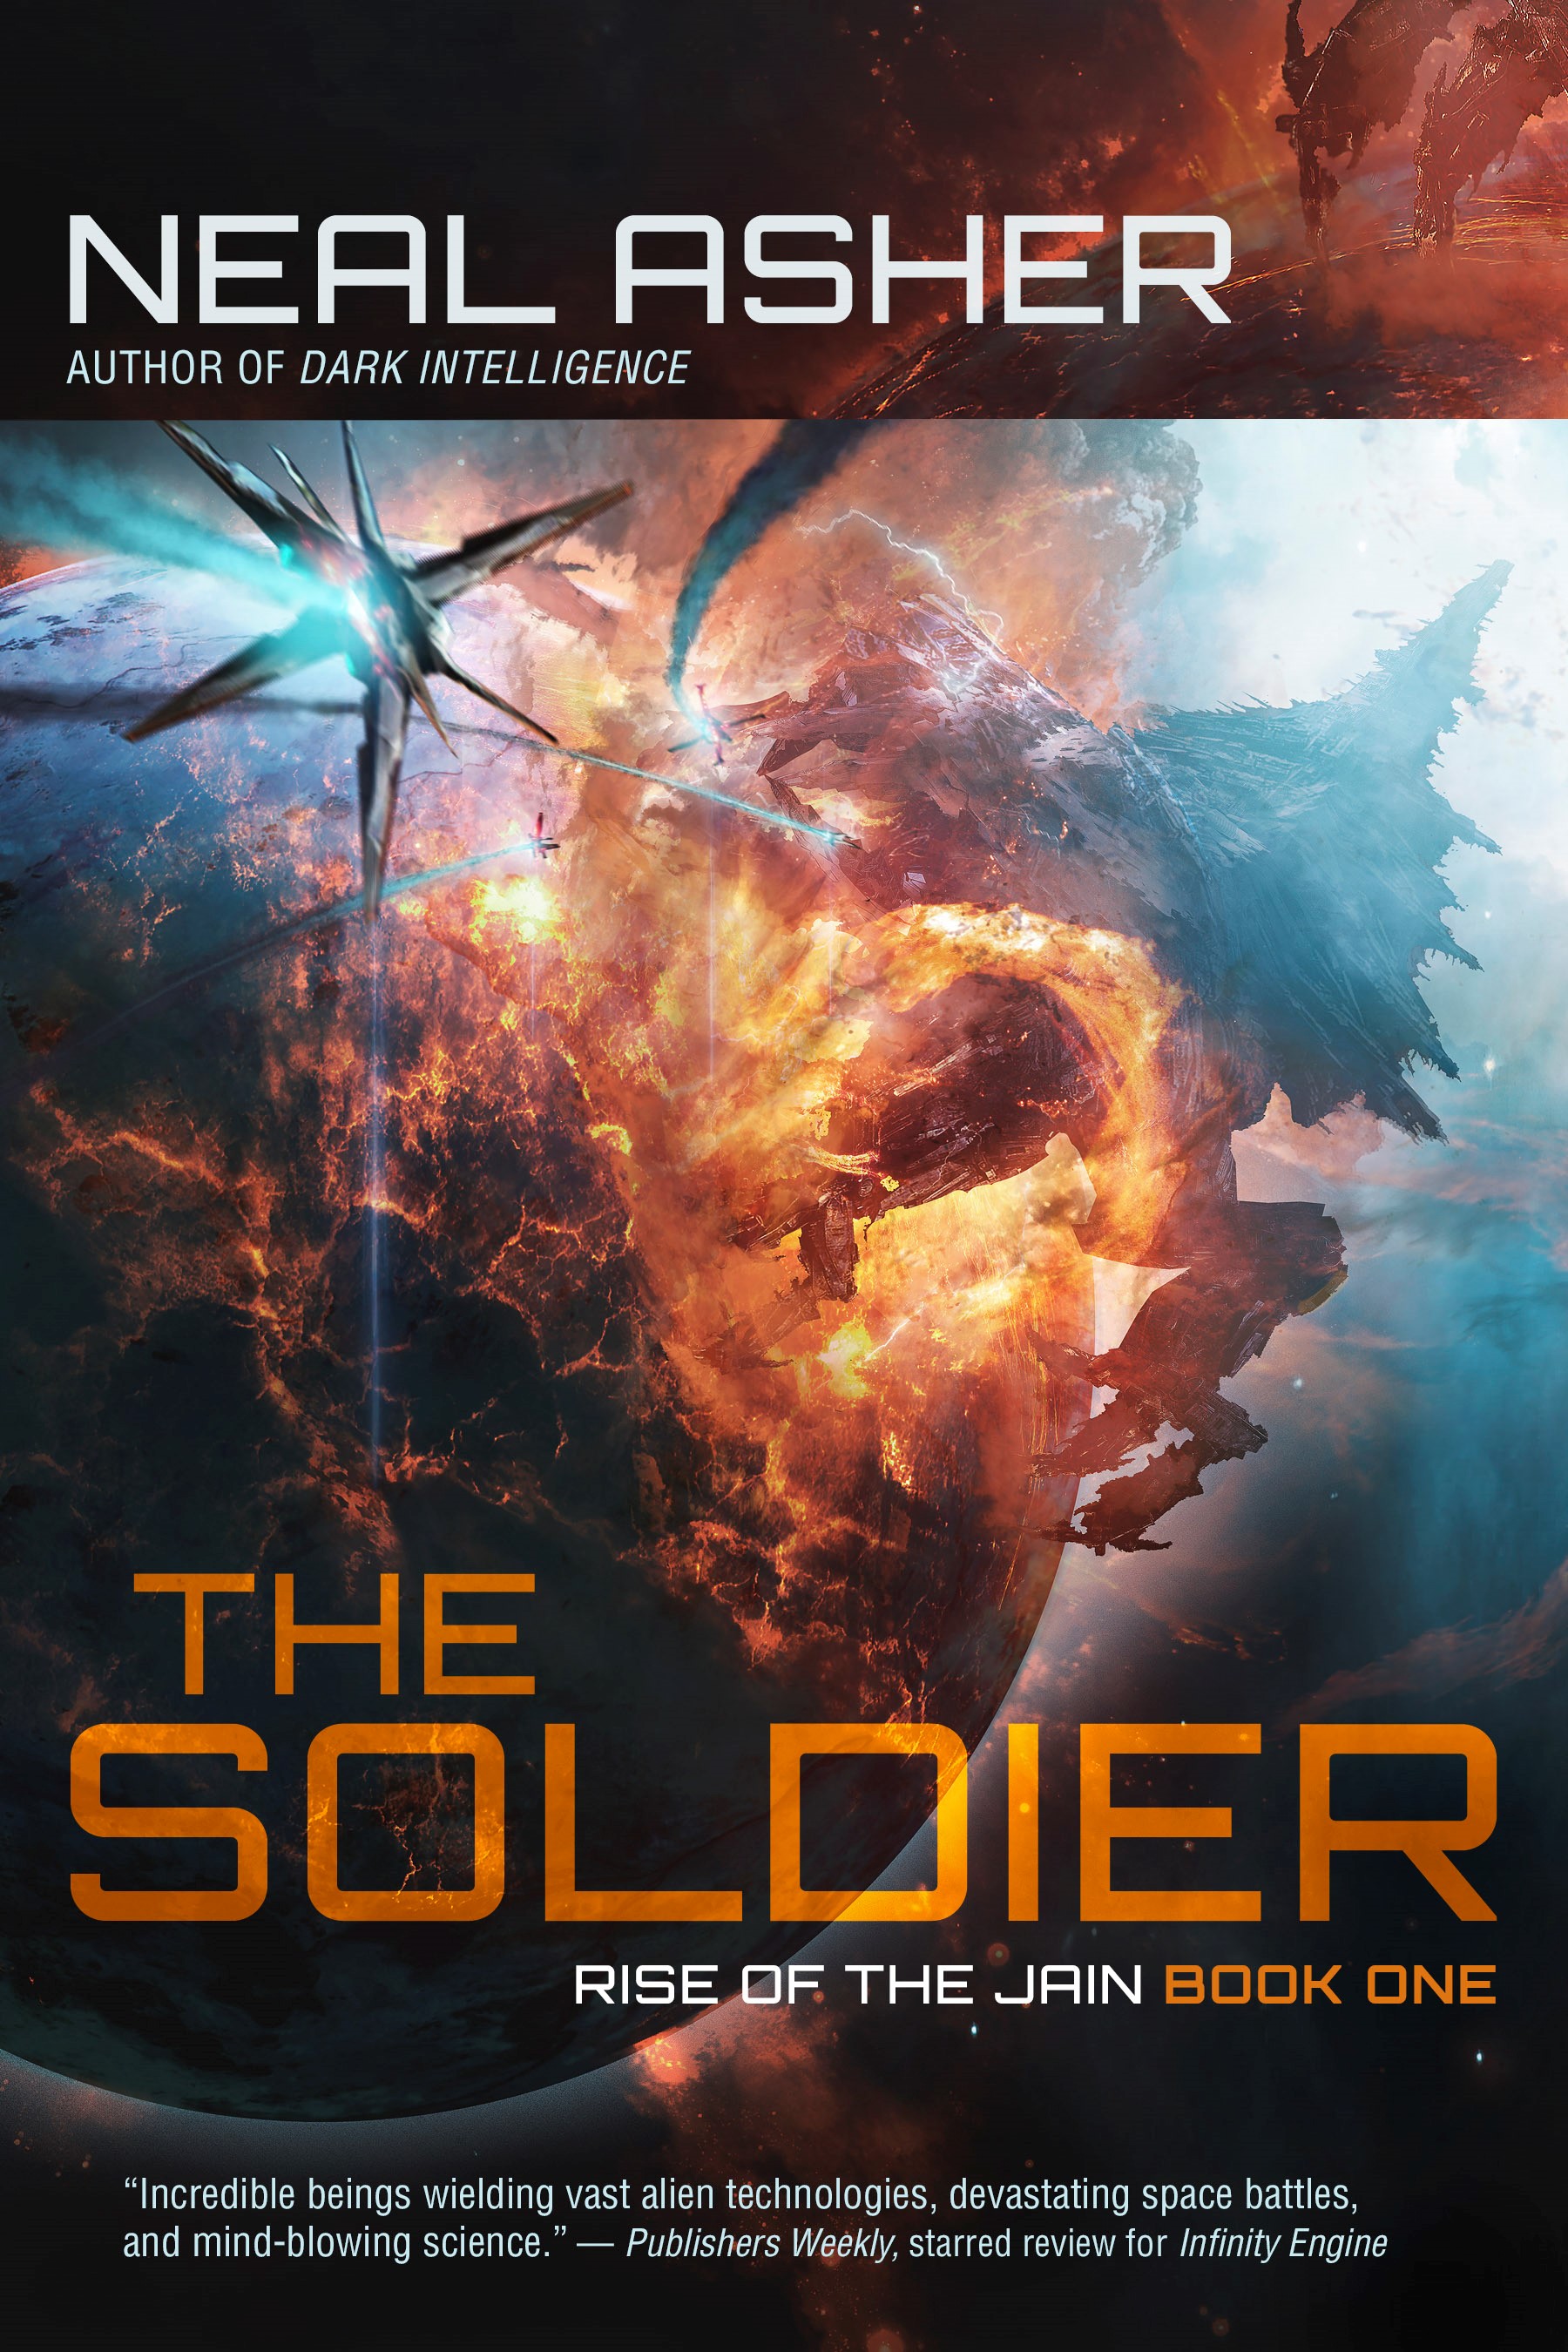 The soldier cover image